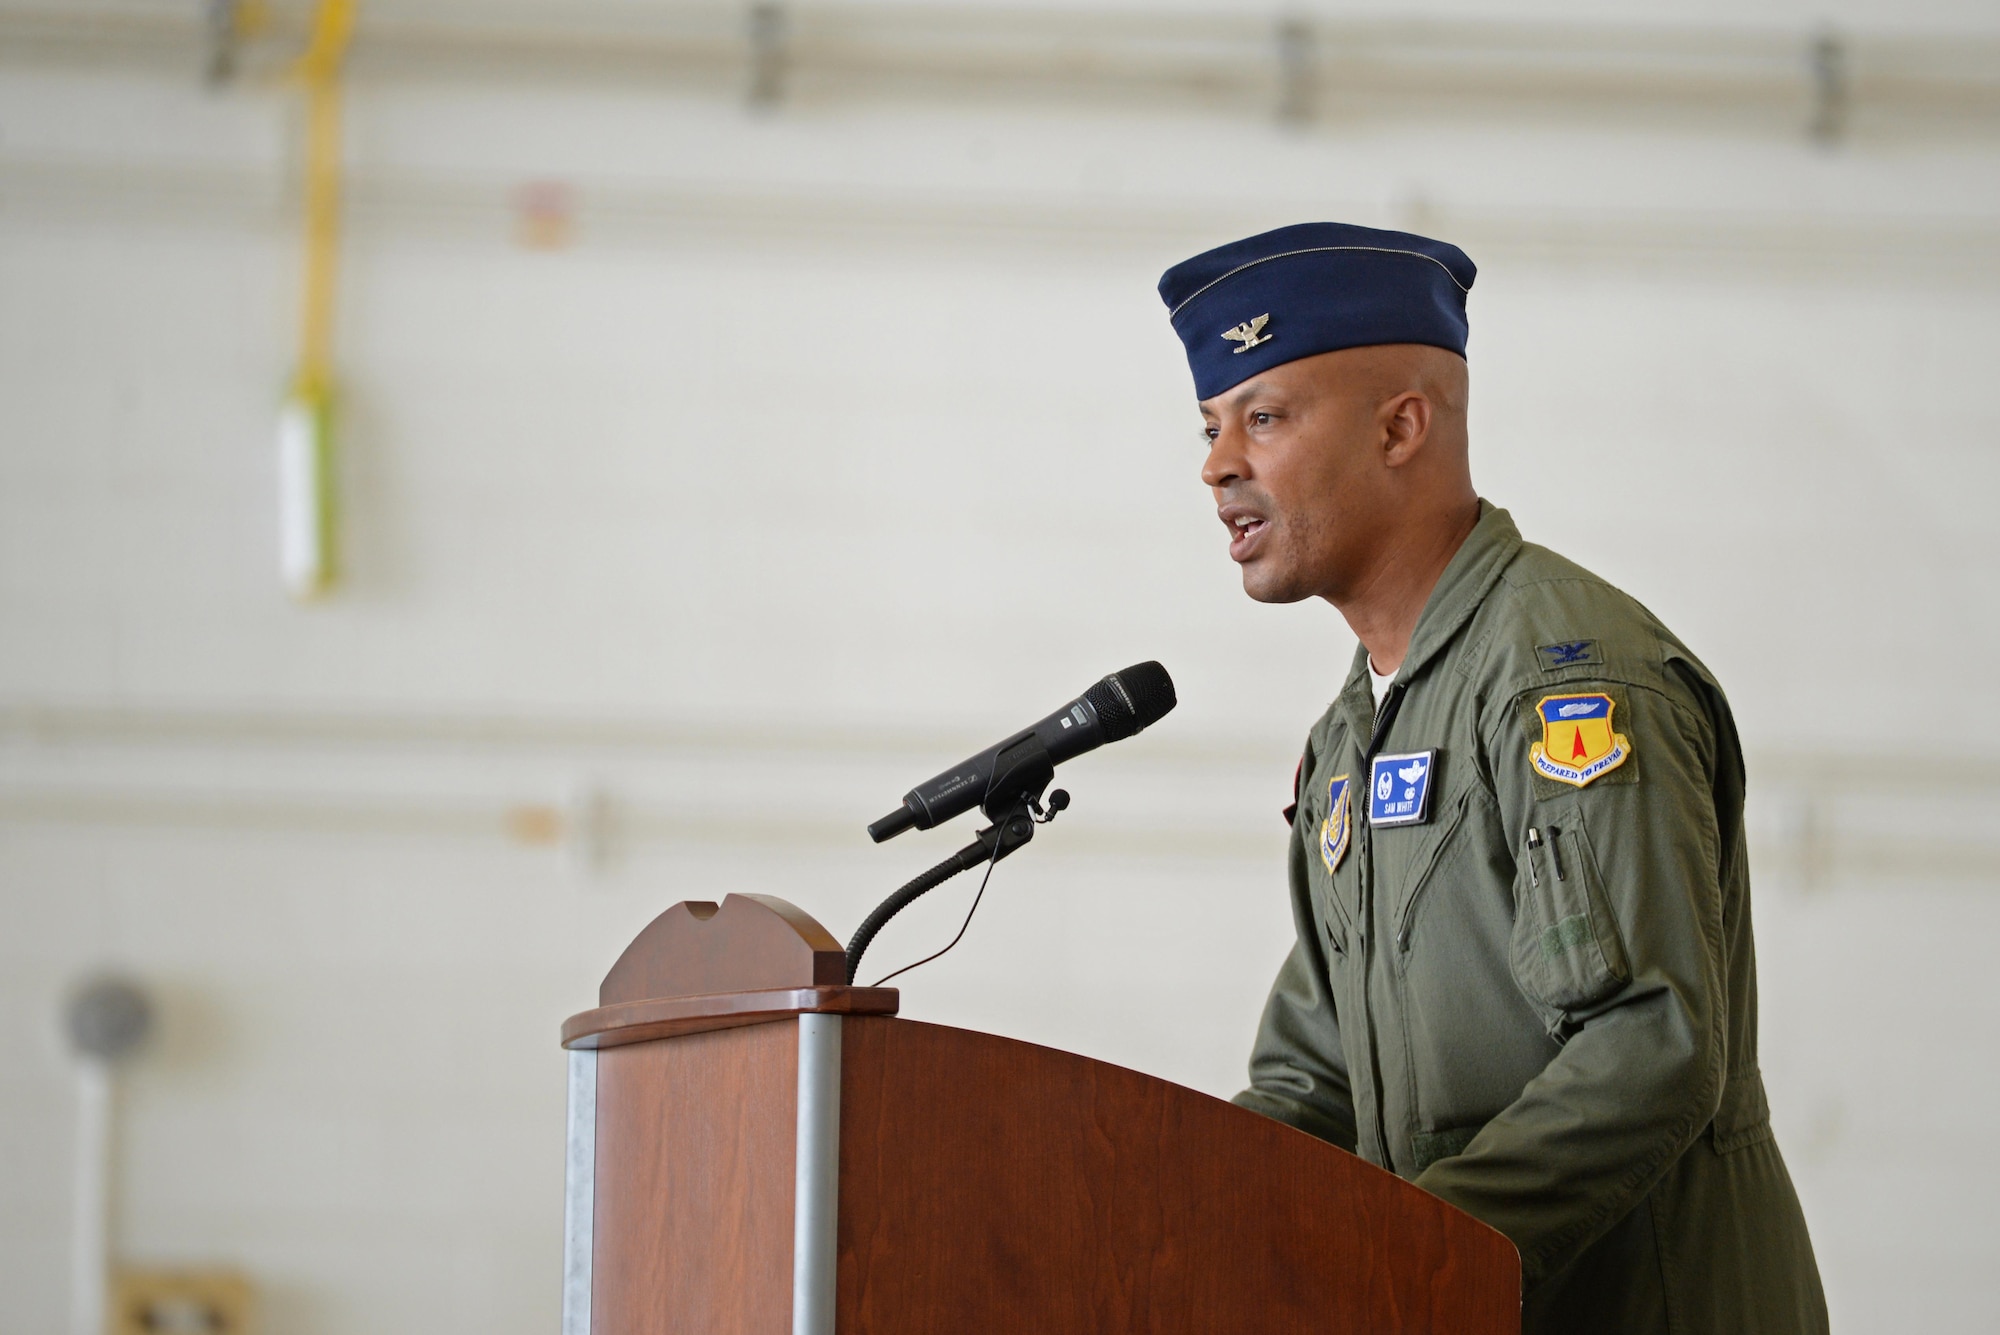 Col. Samuel White, 36th Operations Group commander, speaks during a transfer of authority ceremony at Andersen Air Force Base, Guam, Aug. 15, 2016. The ceremony solidified the responsibility of the U.S. Pacific Command’s Continuous Bomber Presence being passed from the 69th EBS from Minot Air Force Base, N.D, to the 34th EBS from Ellsworth Air Force Base, S.D. (U.S. Air Force photo by Airman 1st Class Jacob Skovo)